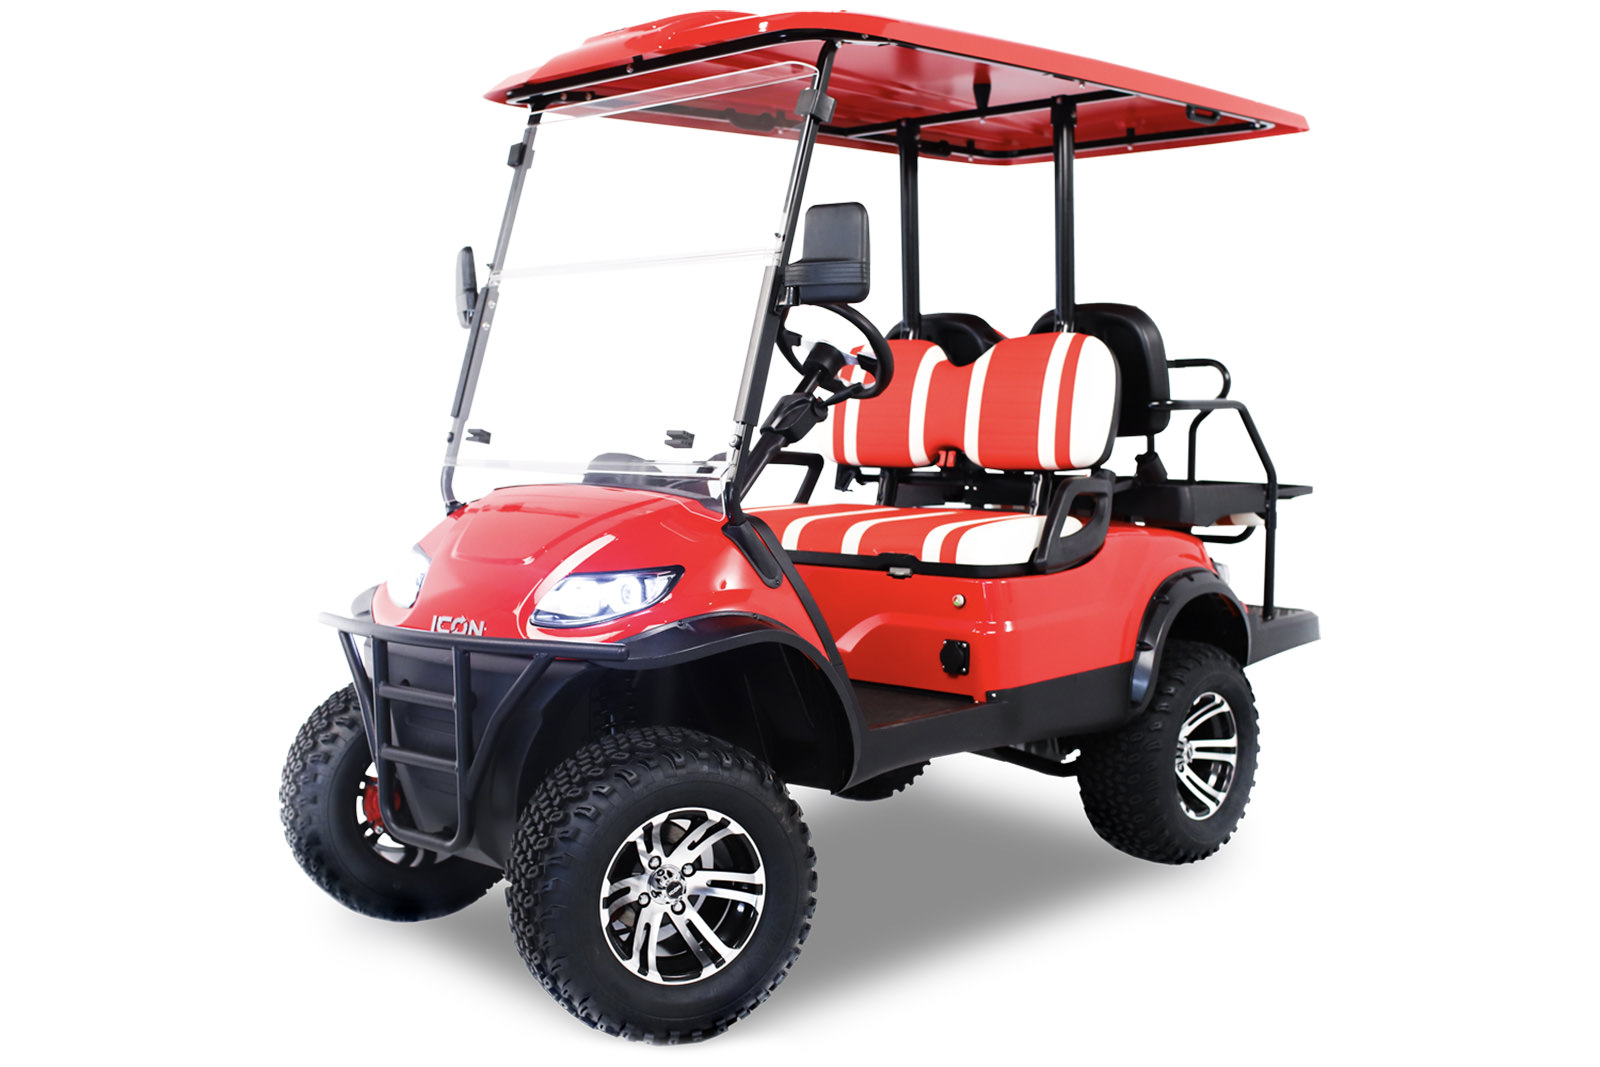 ICON-Golf-Cart-Features